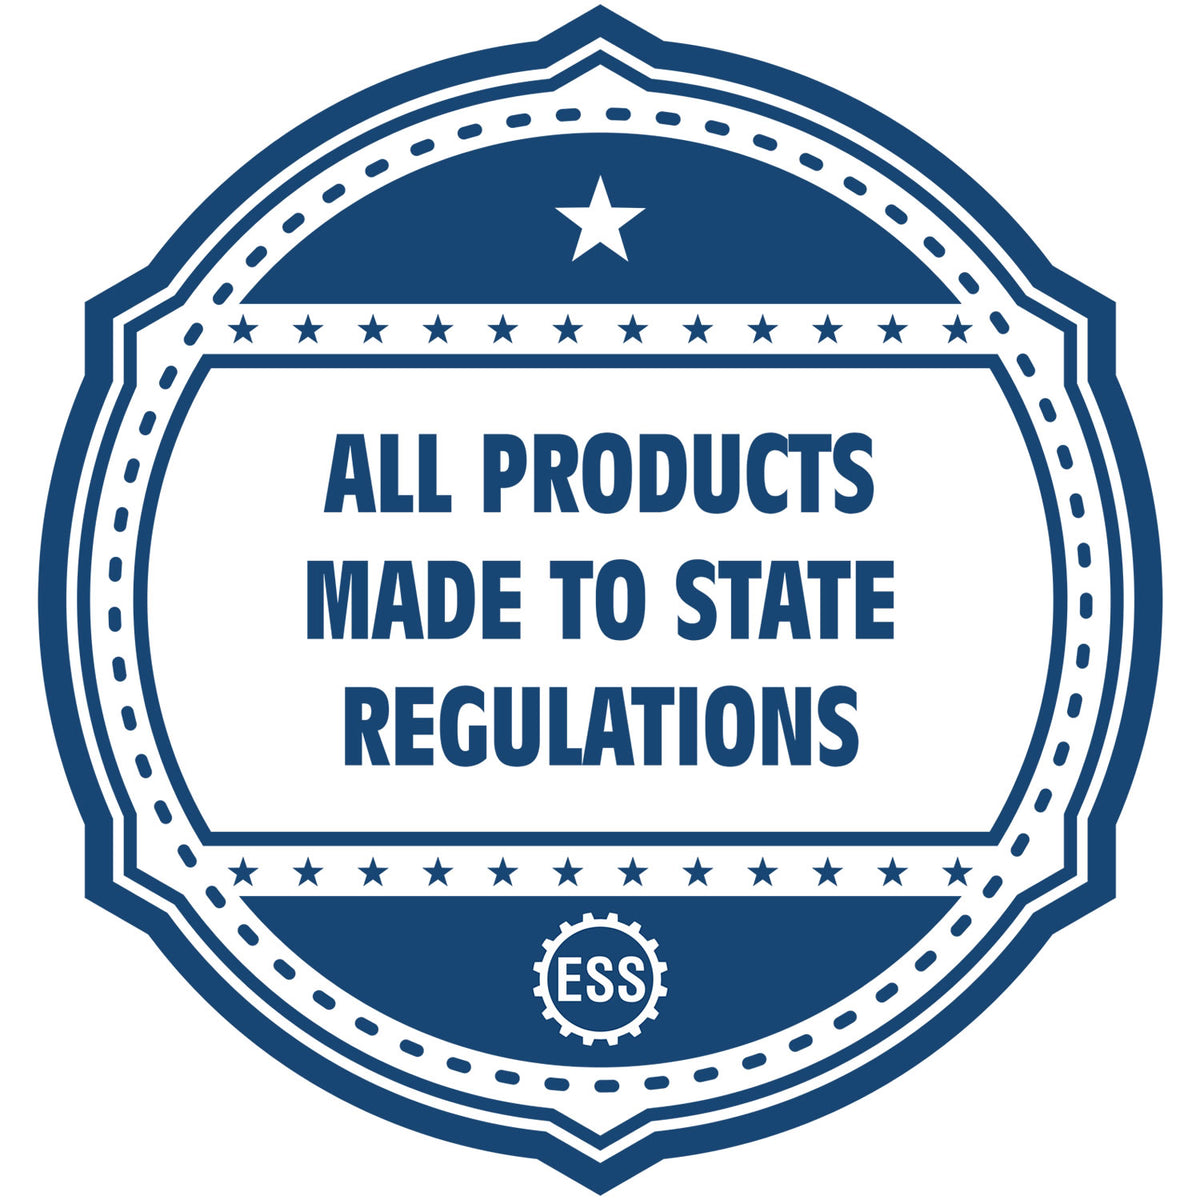 A blue icon or badge for the Hybrid Ohio Engineer Seal showing that this product is made in compliance with state regulations.